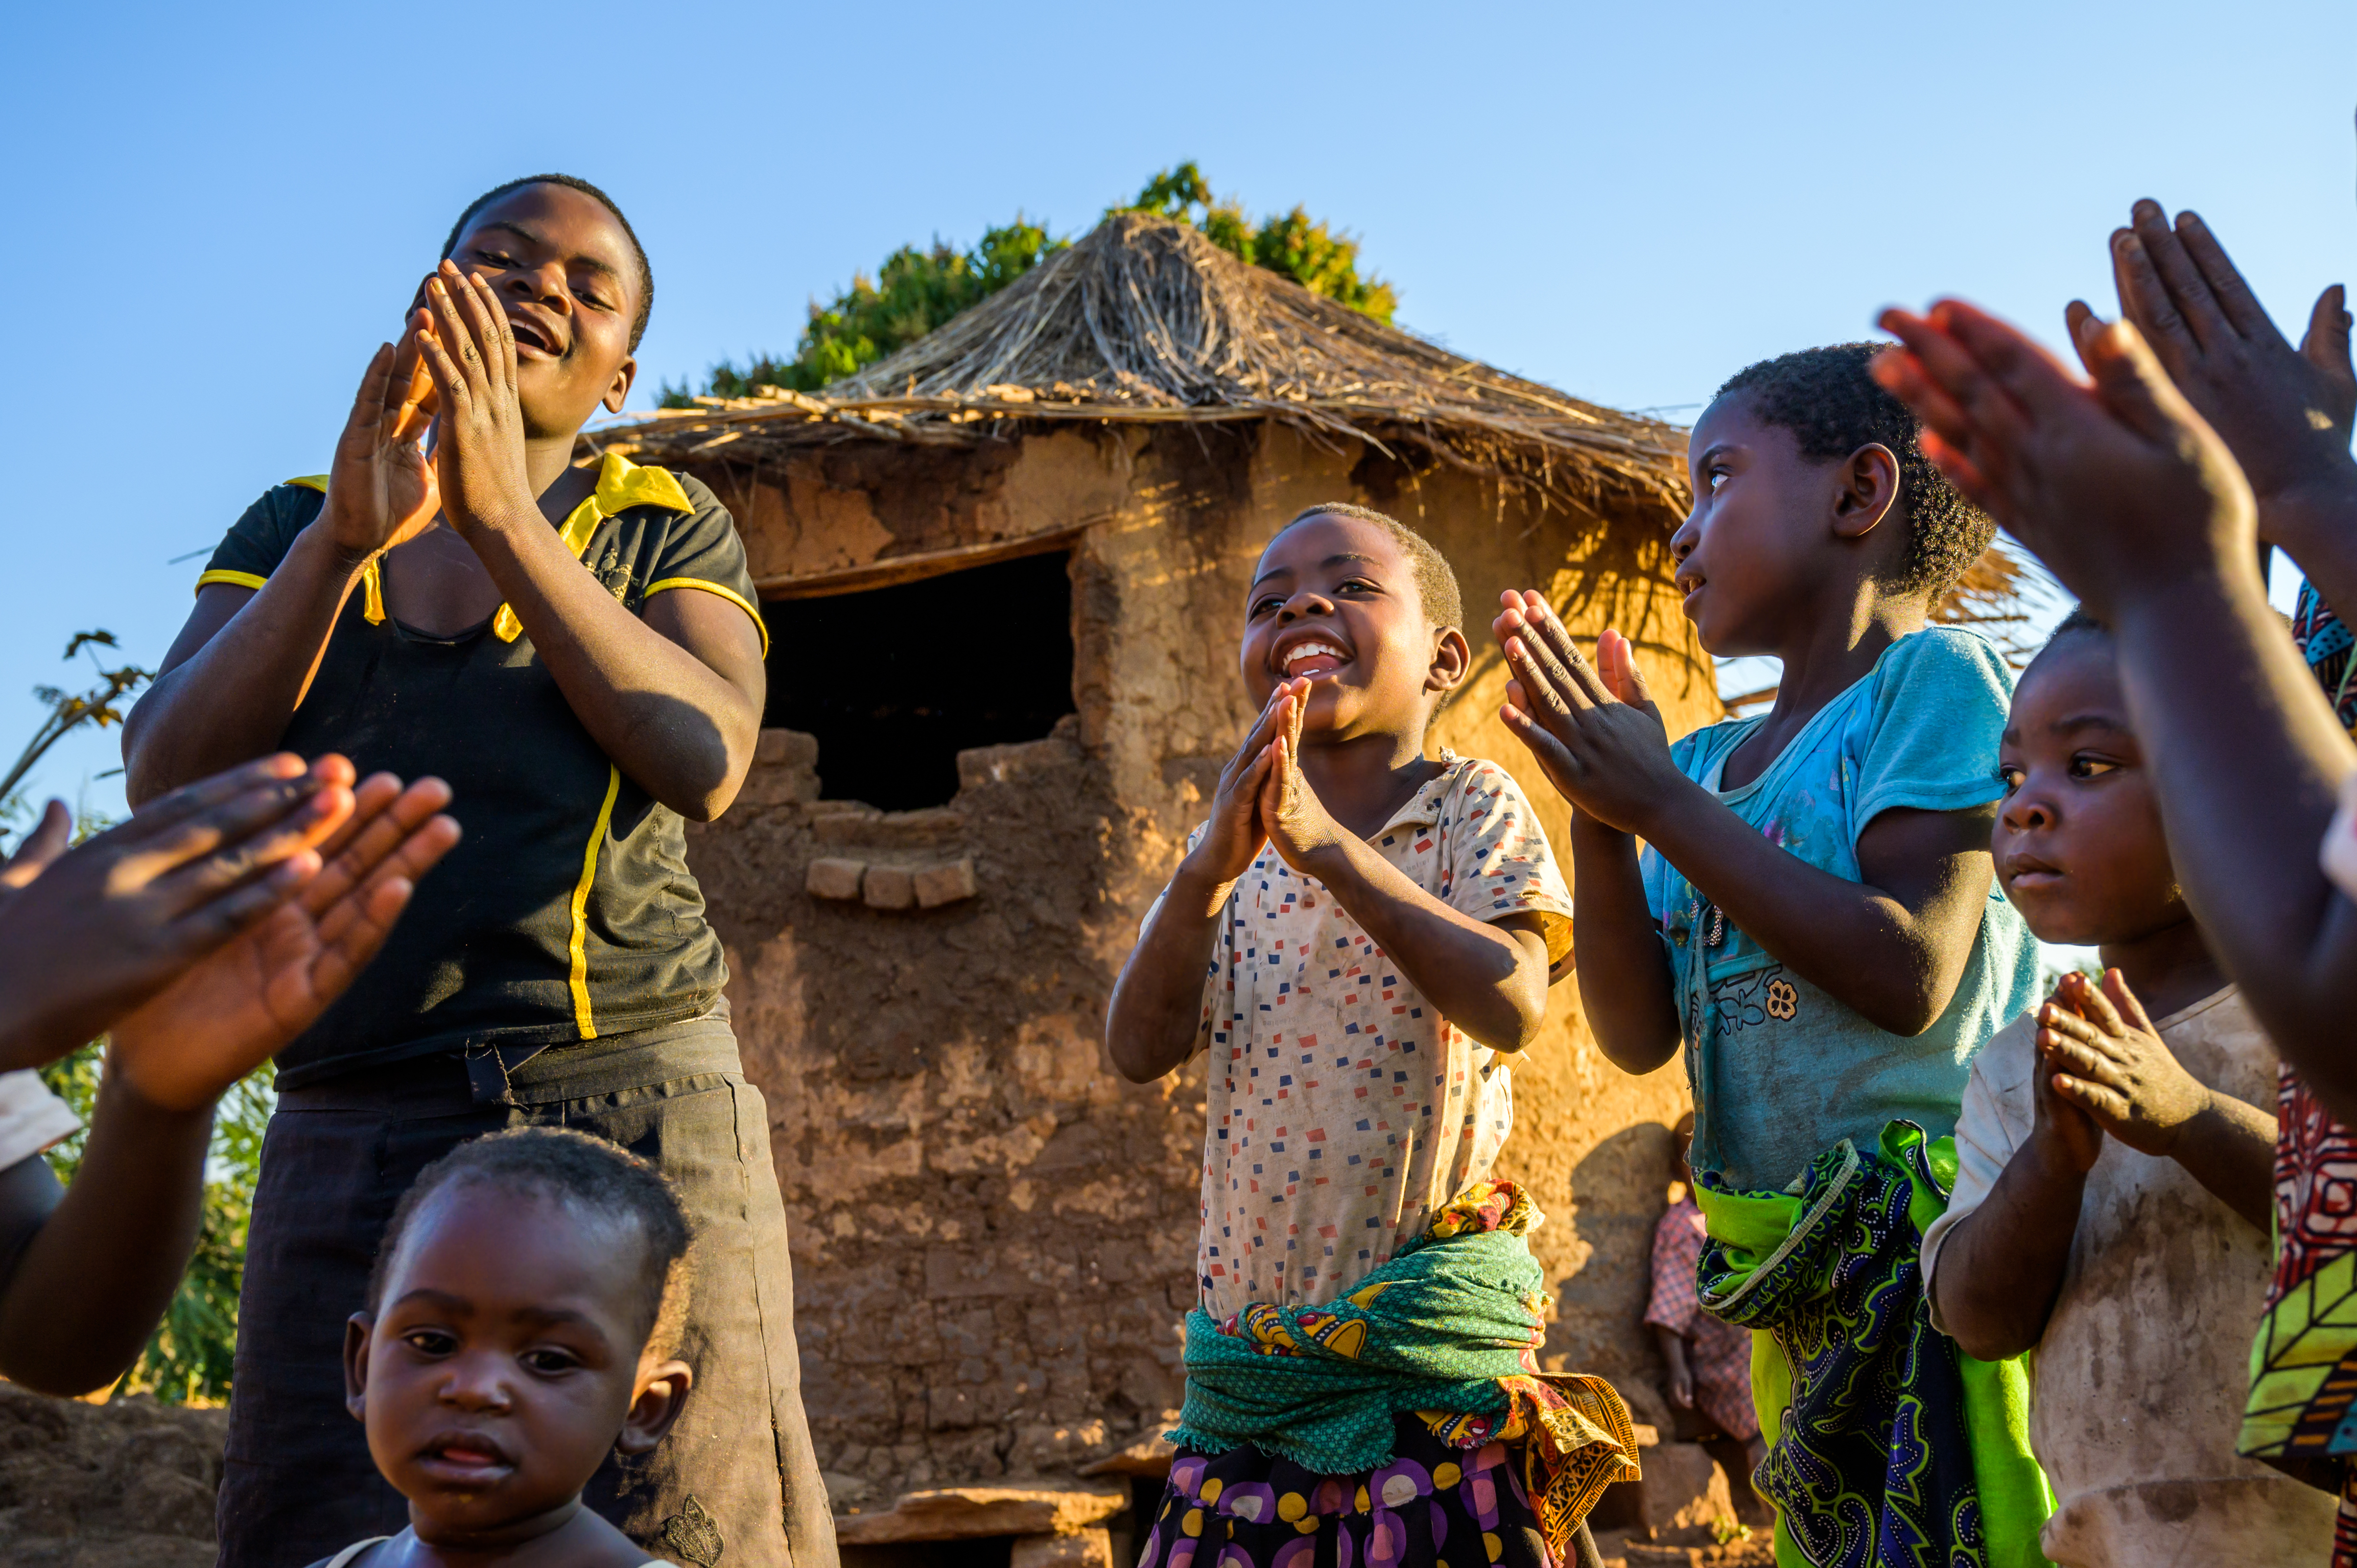 Children dancing and clapping outside their hut in celebration